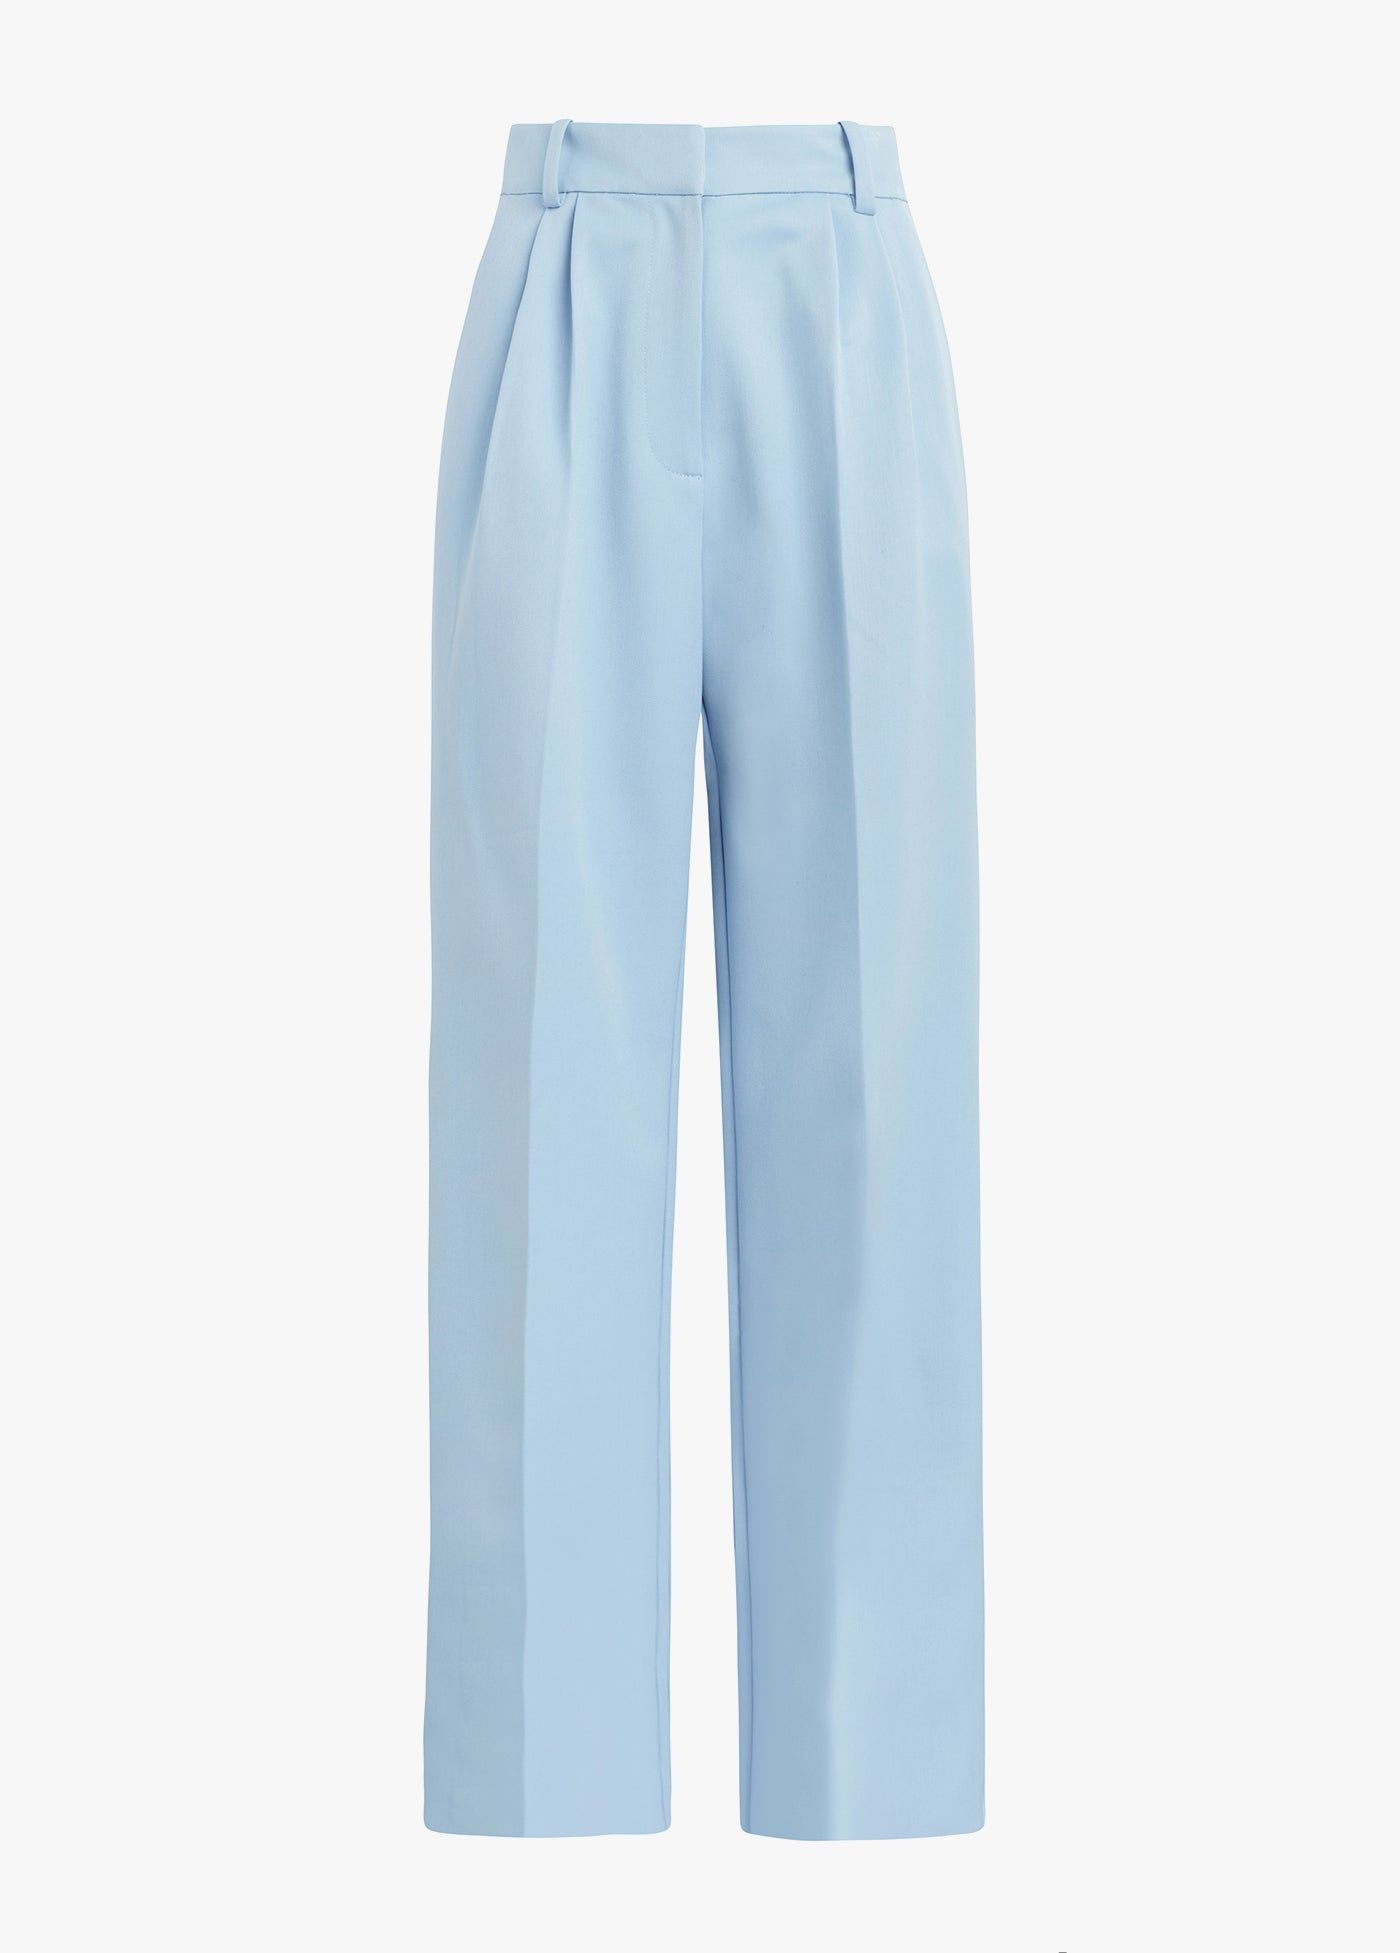 Stylish Blue Trousers for Versatile Looks